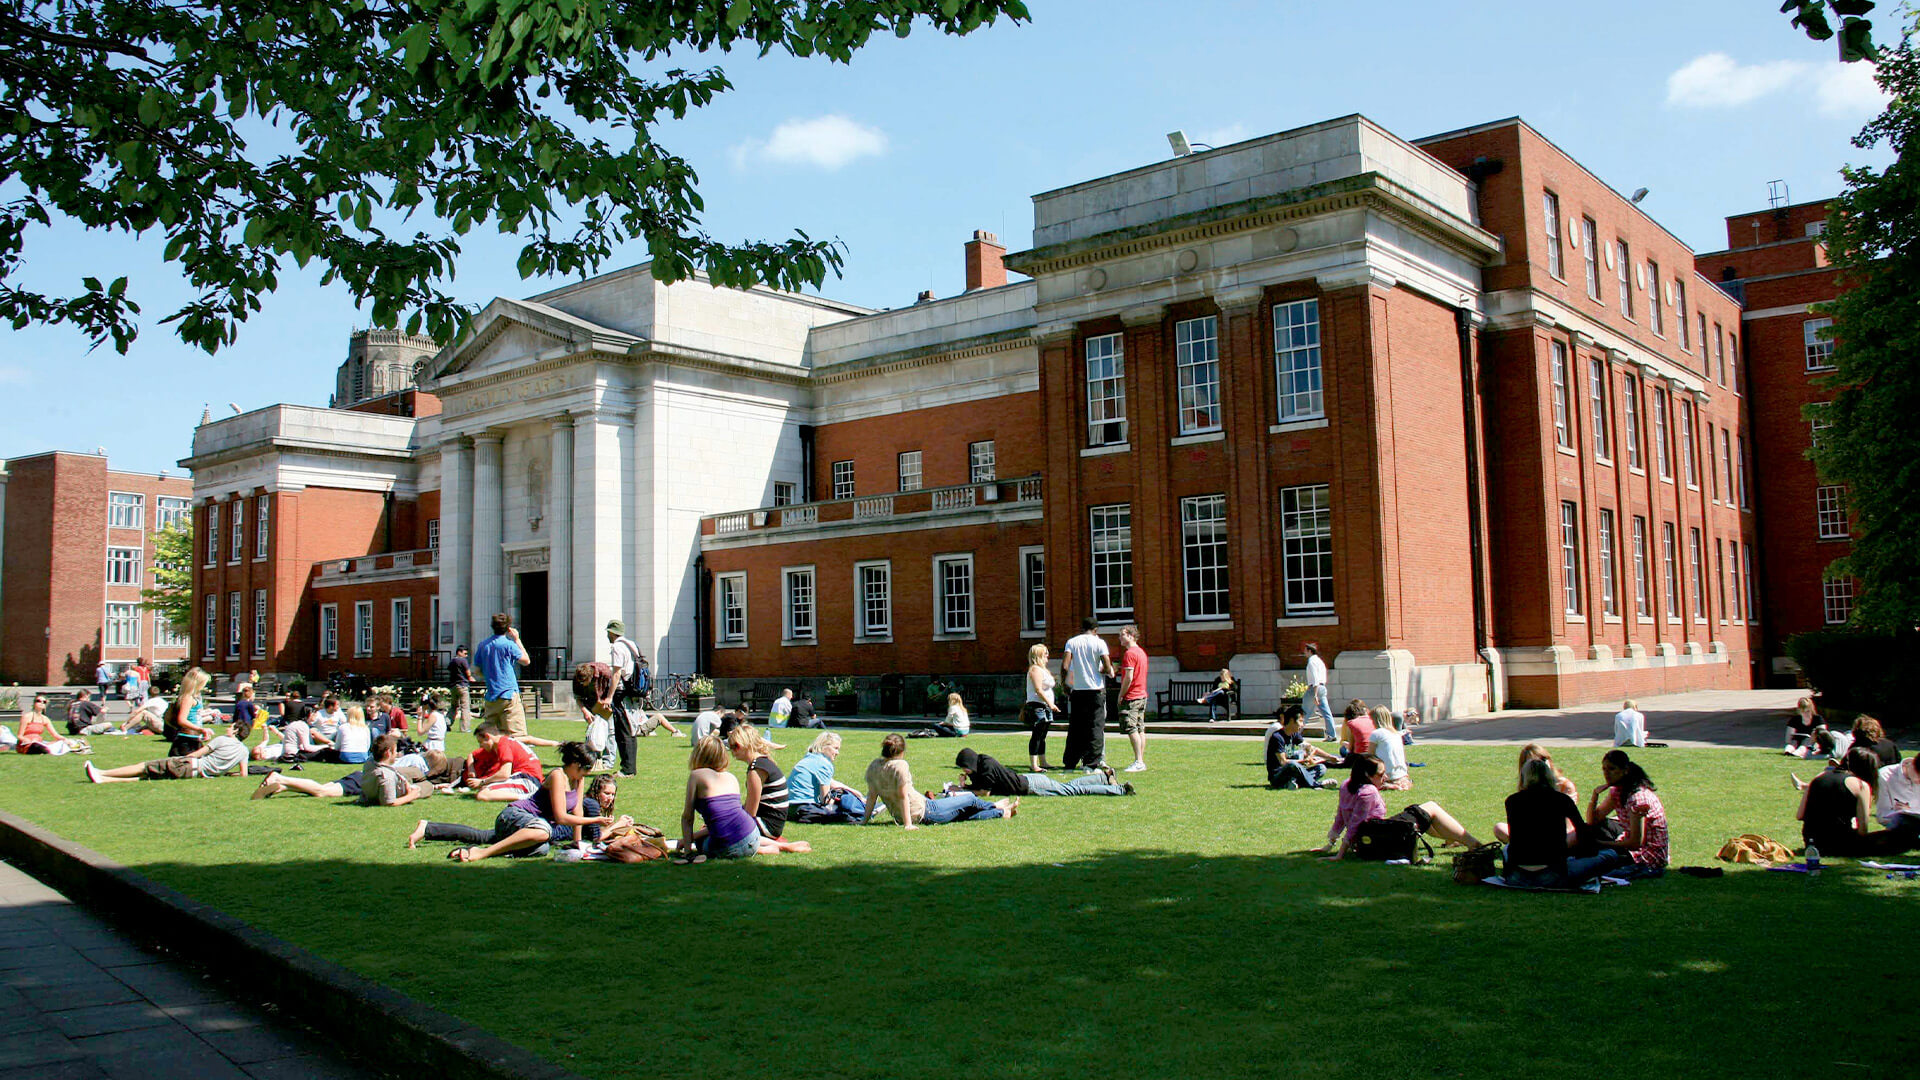 Photo of students on The University of Manchester campus lawn